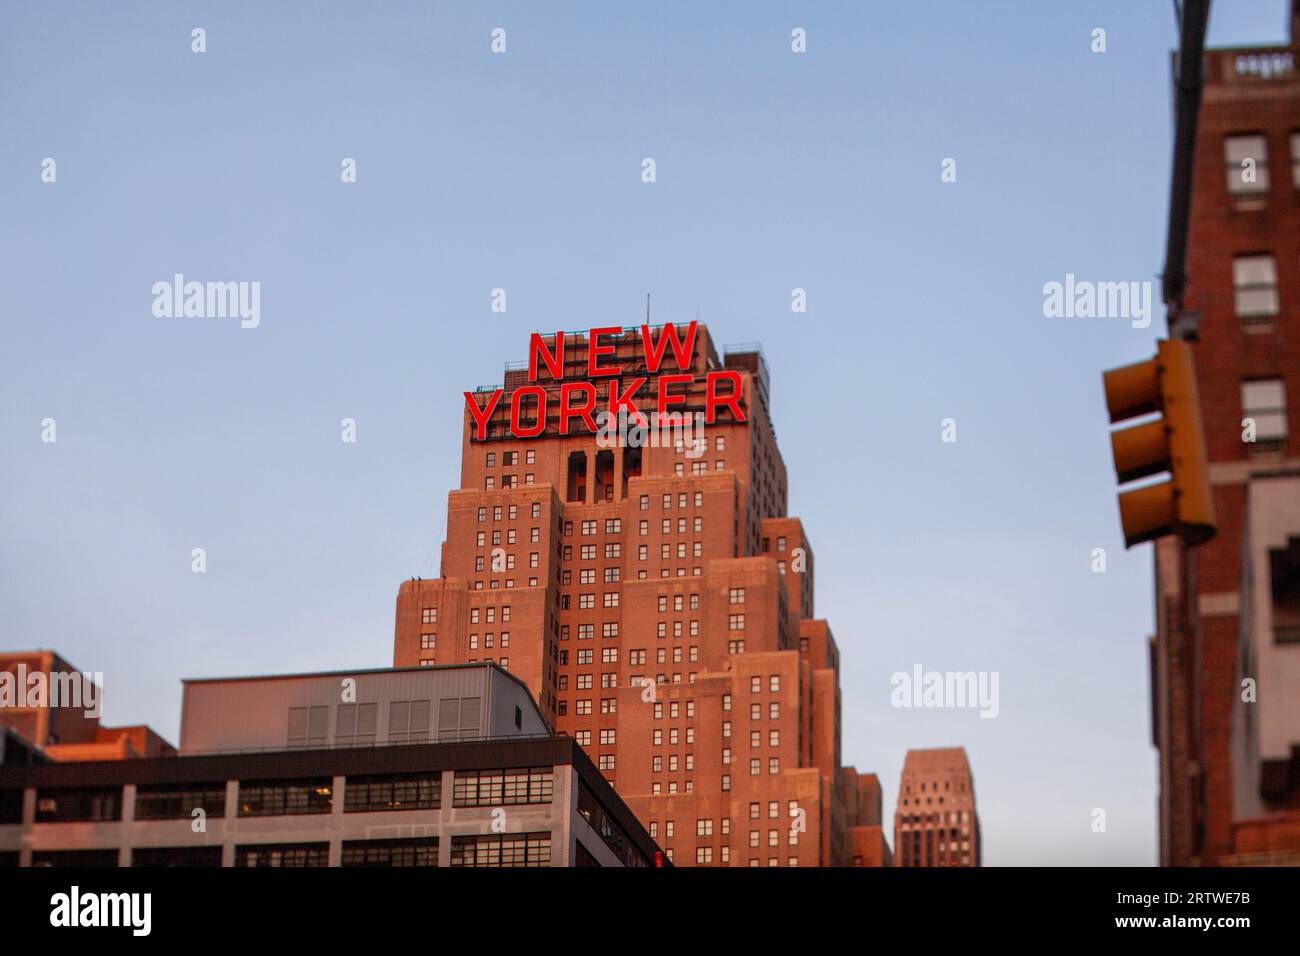 The New Yorker hotel building in NYC at sunset clear sky Stock Photo